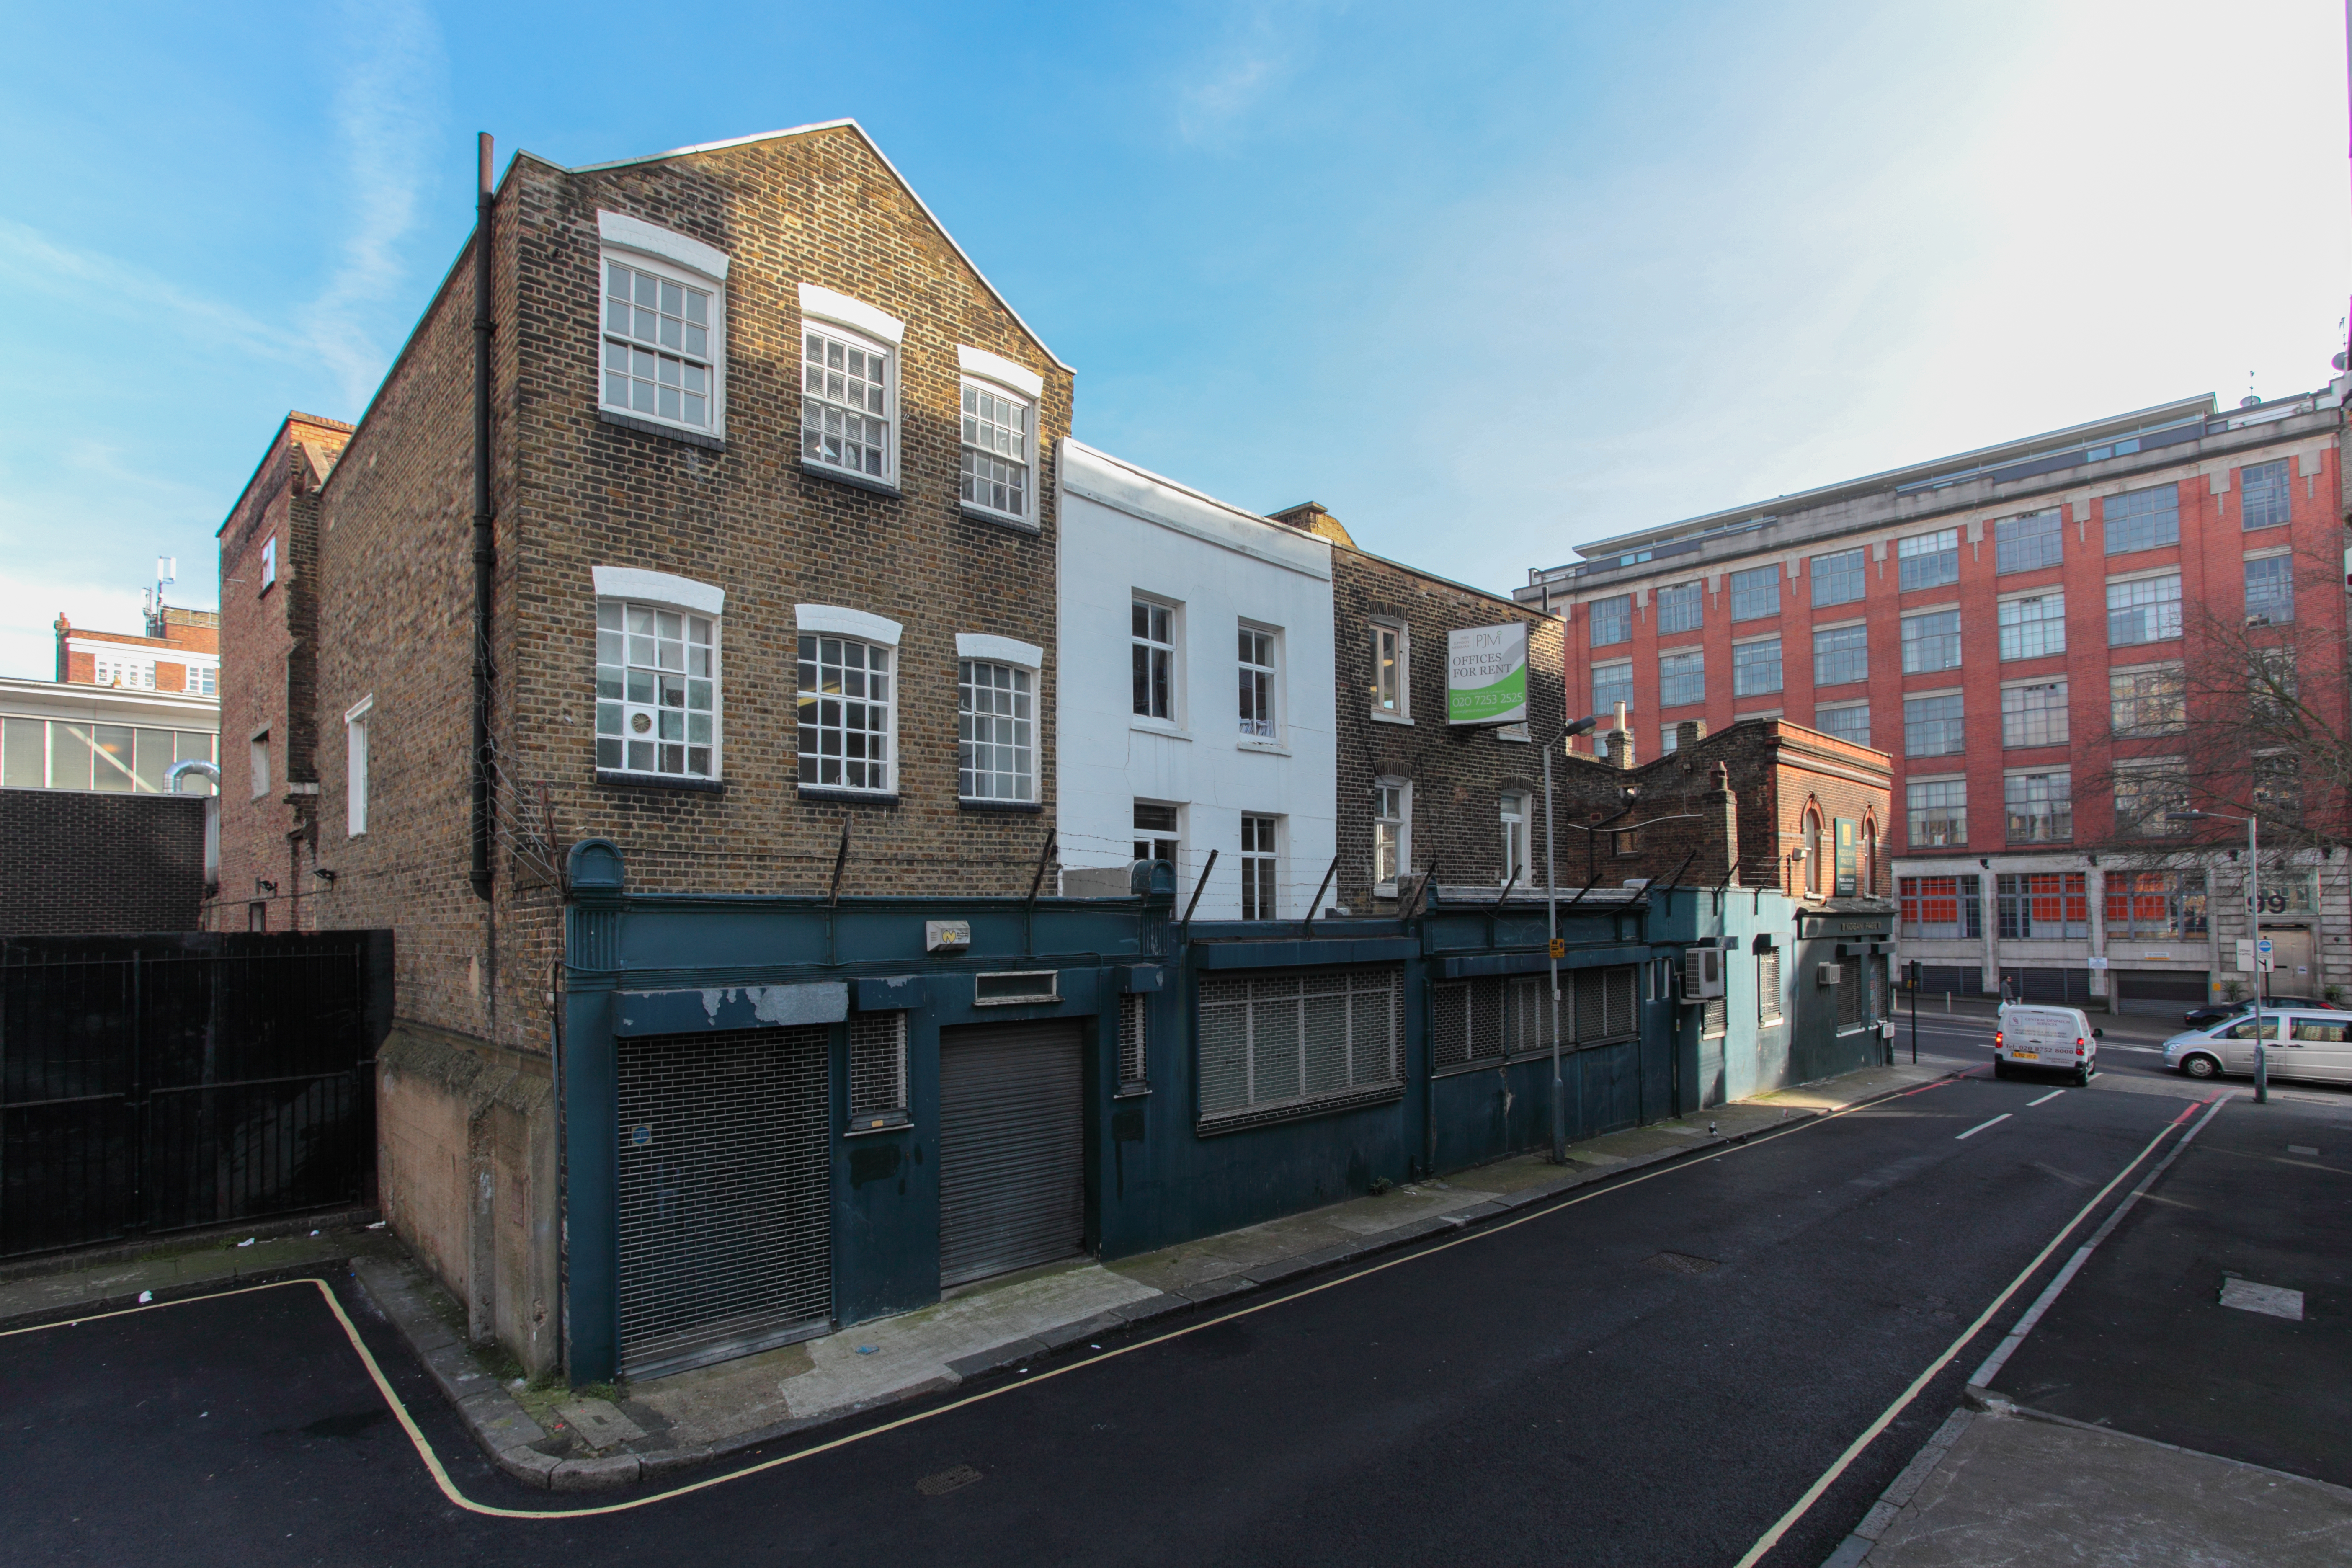 Substantial corner site comprising office, retail and residential units. Acquired unconditionally for redevelopment. Pentonville Road, N1.